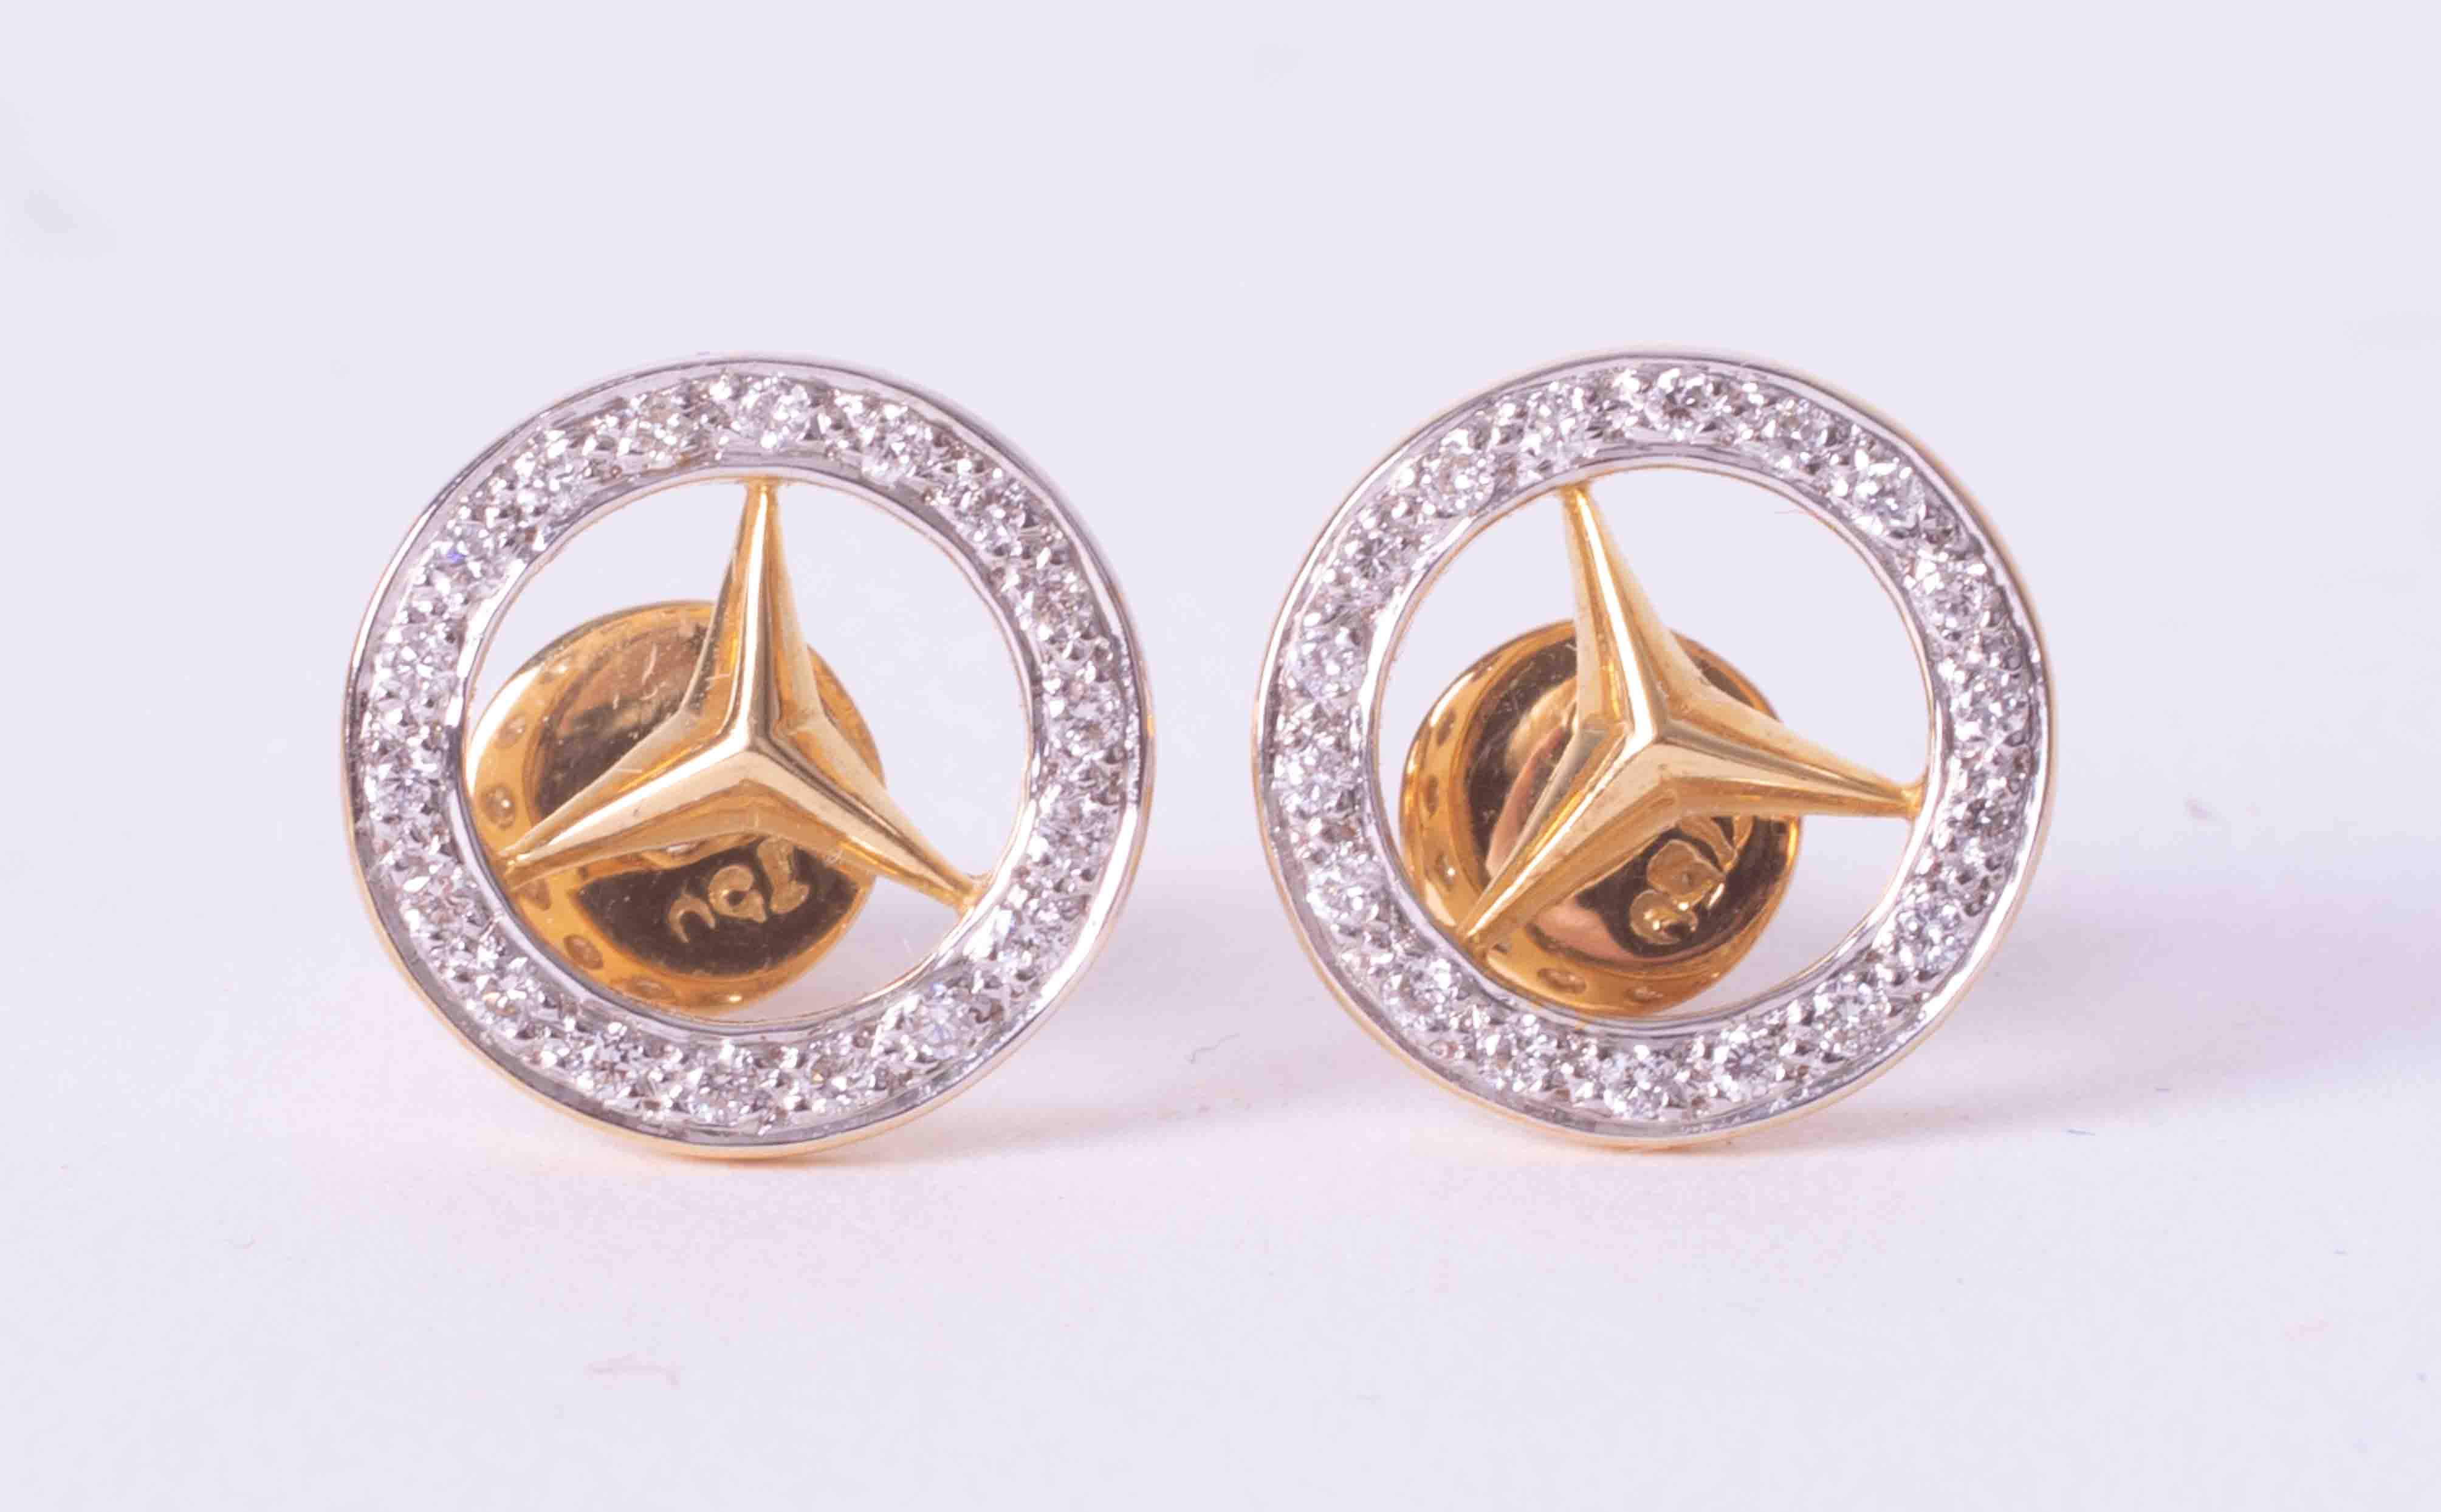 A pair of 18ct yellow & white gold Mercedes Benz earrings set with an outer circle of small round